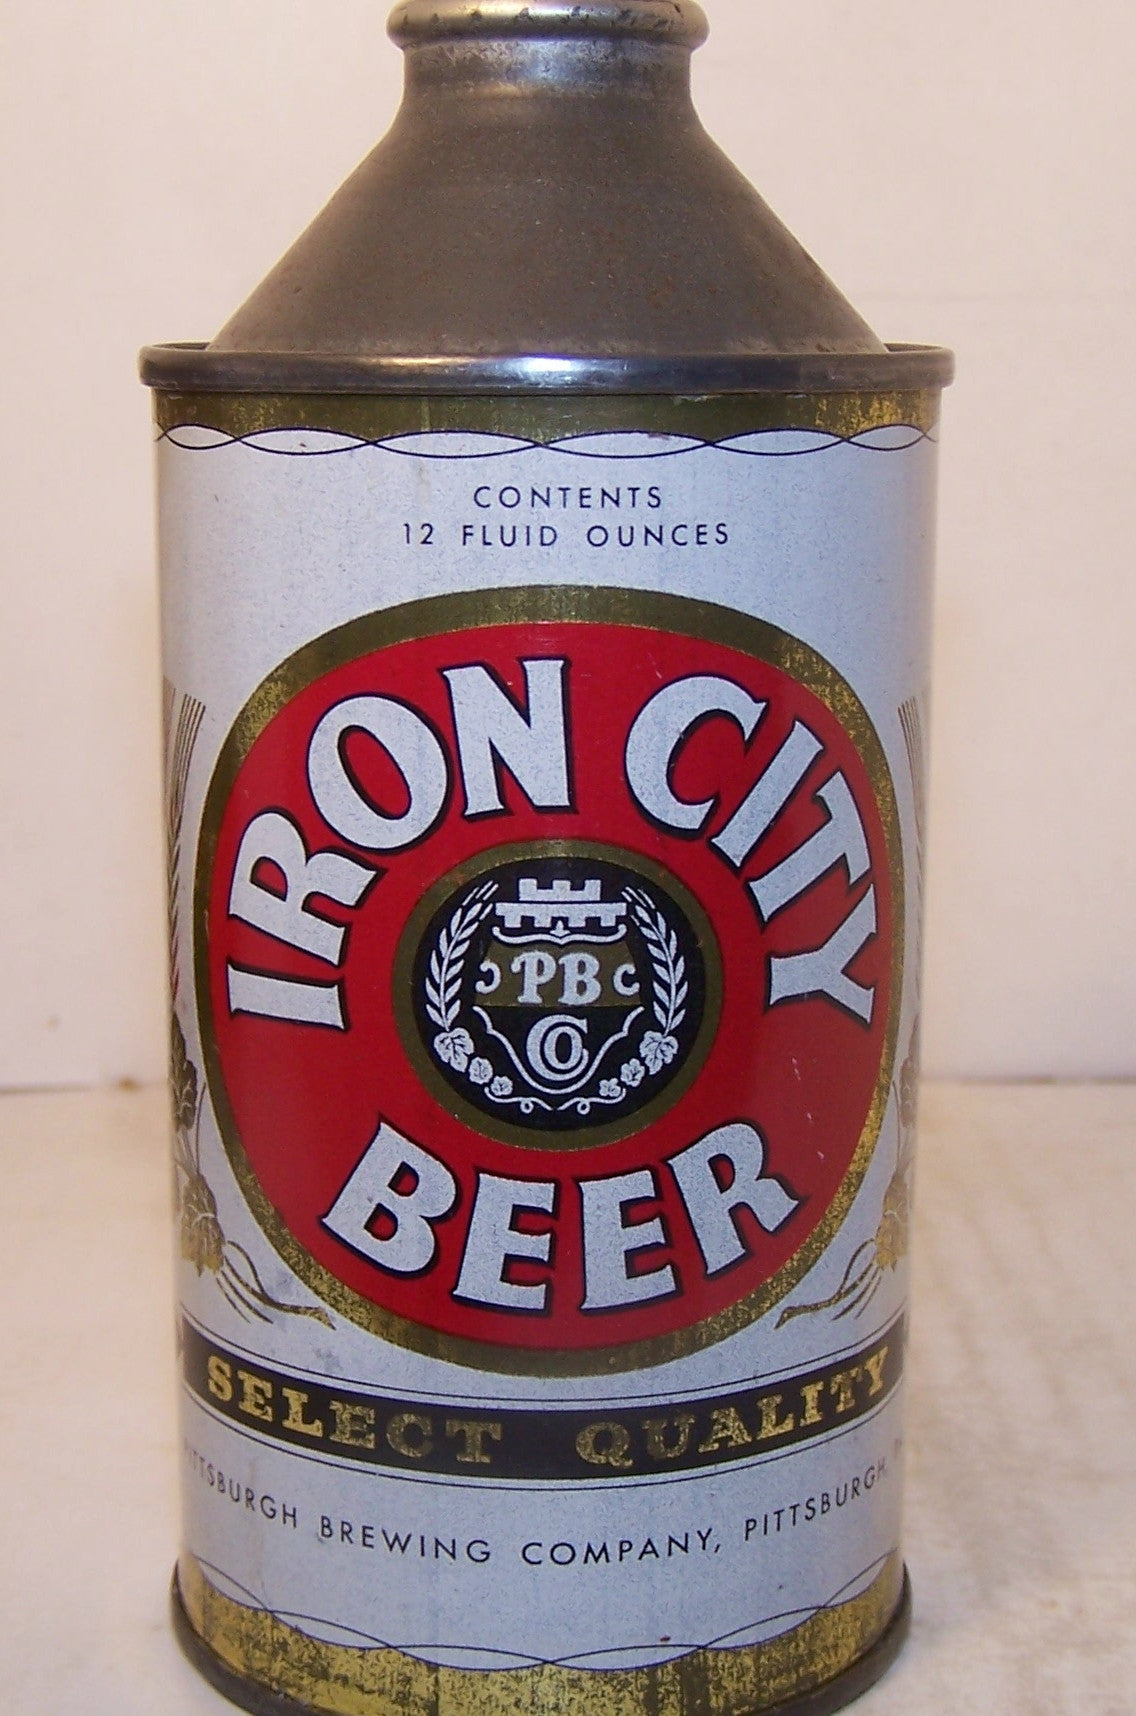 Iron City Select Quality Beer, USBC 169-1, Grade 1- Sold 4/25/15